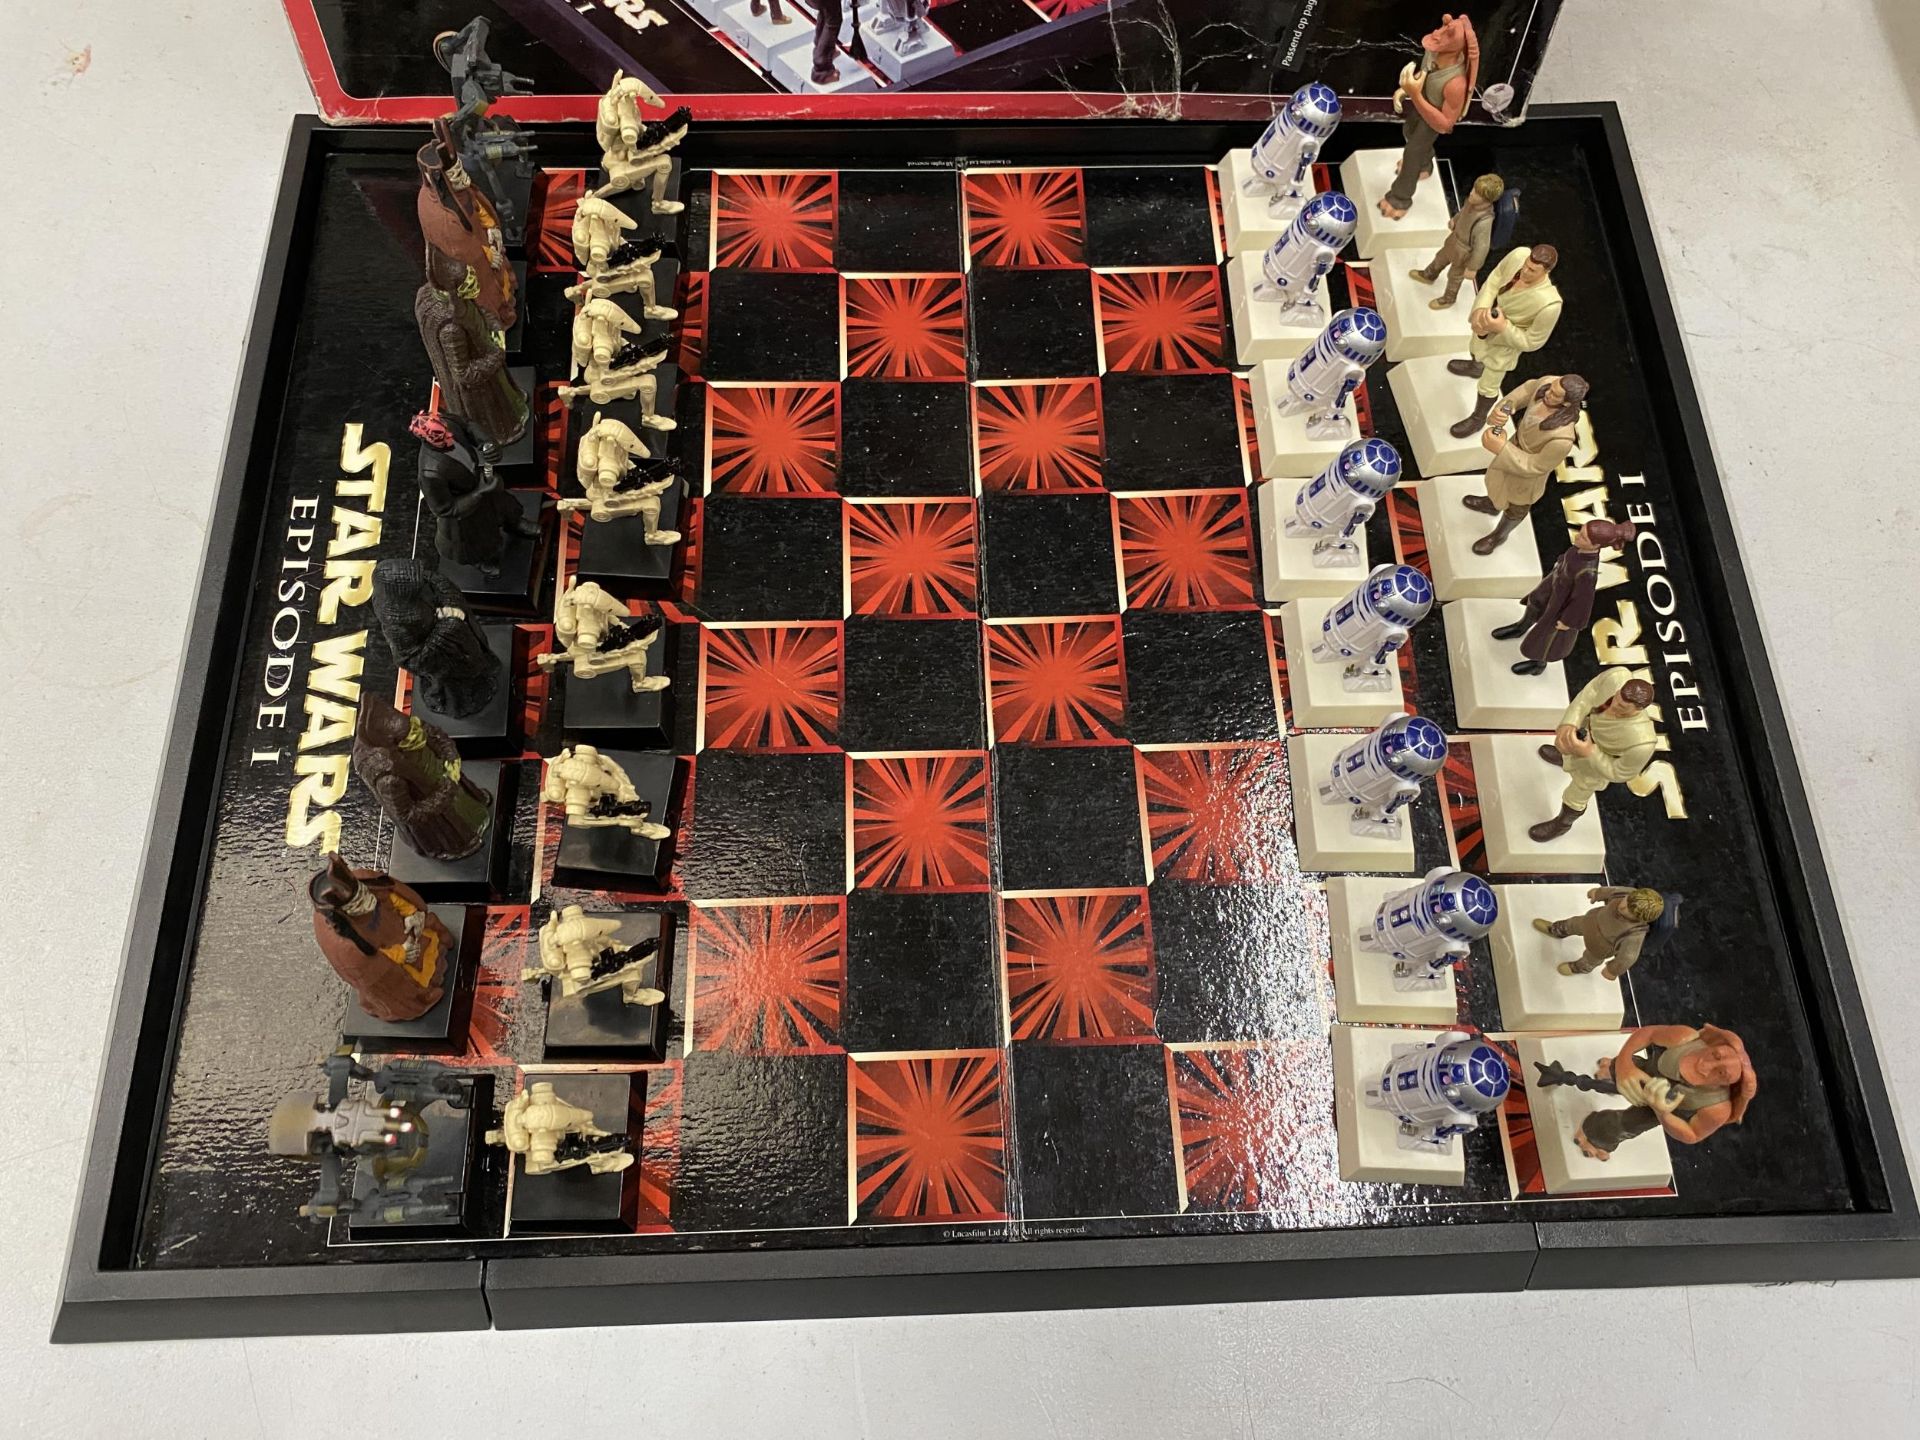 A BOXED STAR WARS EPISODE I COMPLETE FIGURAL CHESS SET AND FURTHER JIGSAWS - Image 2 of 4